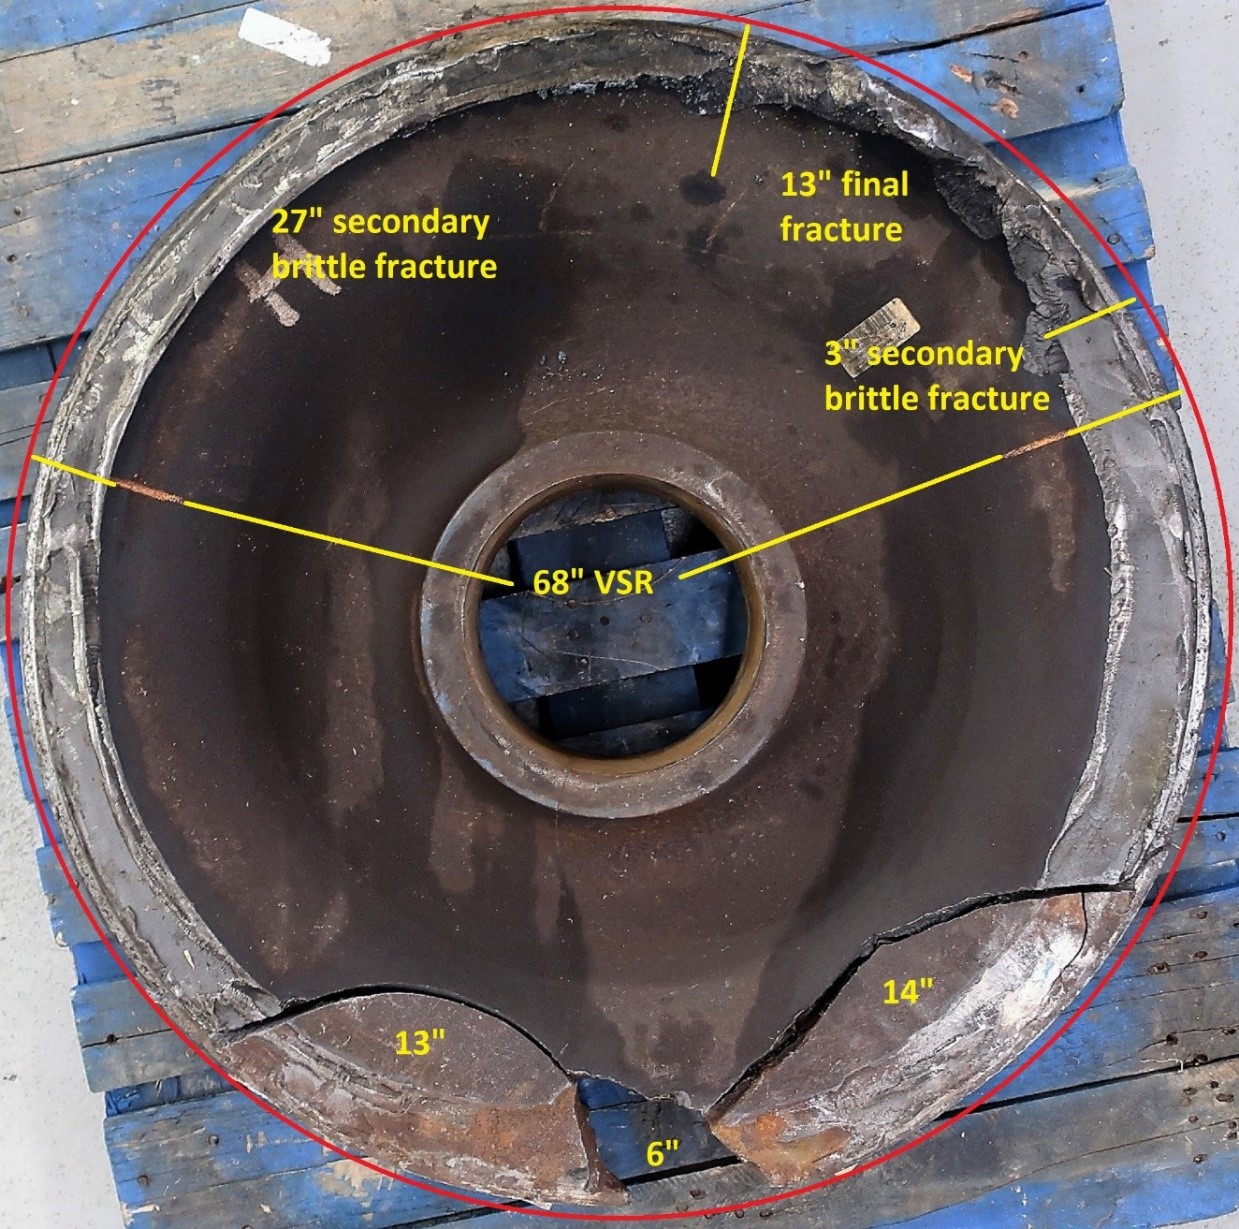 Fracture surfaces and failure zones of the R4 wheel on car ATW 400515 (Source: TSB)